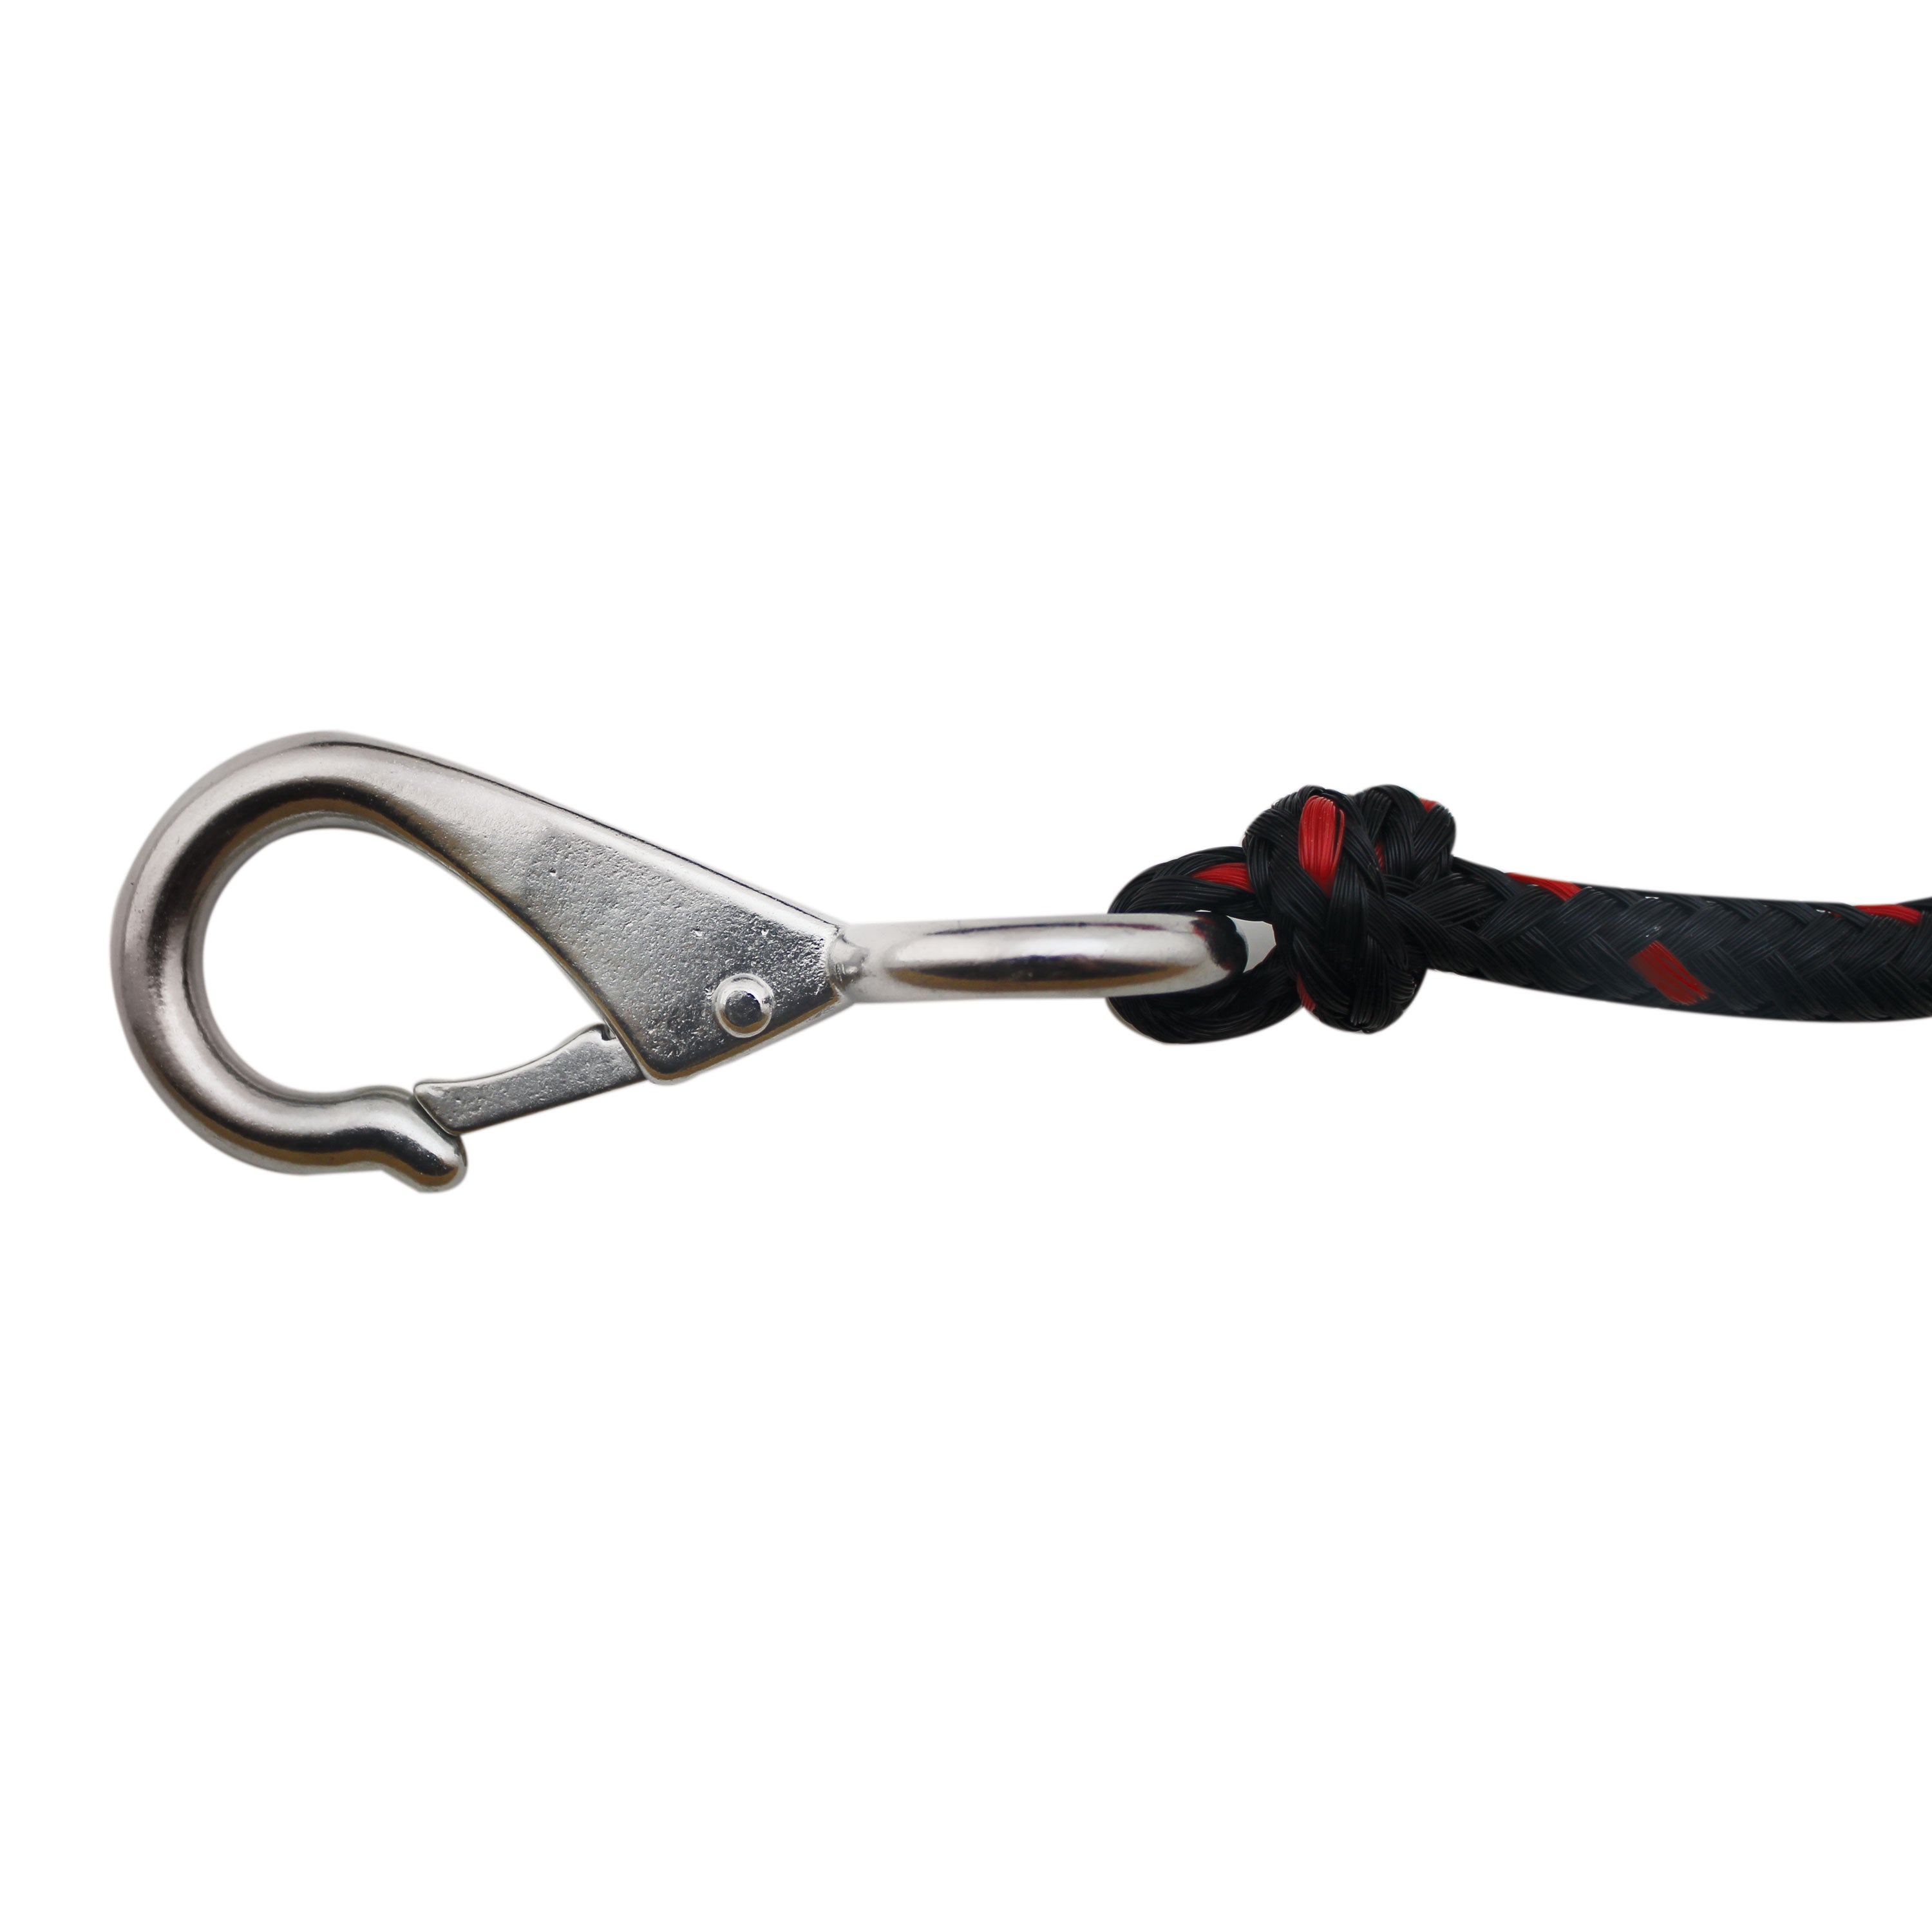 Extreme Max 3006.6705 BoatTector Complete Grapnel Anchor Kit for Small Boats, Jon Boats, Flat Bottoms, Inflatable Boats, etc. - 5.5 lbs.